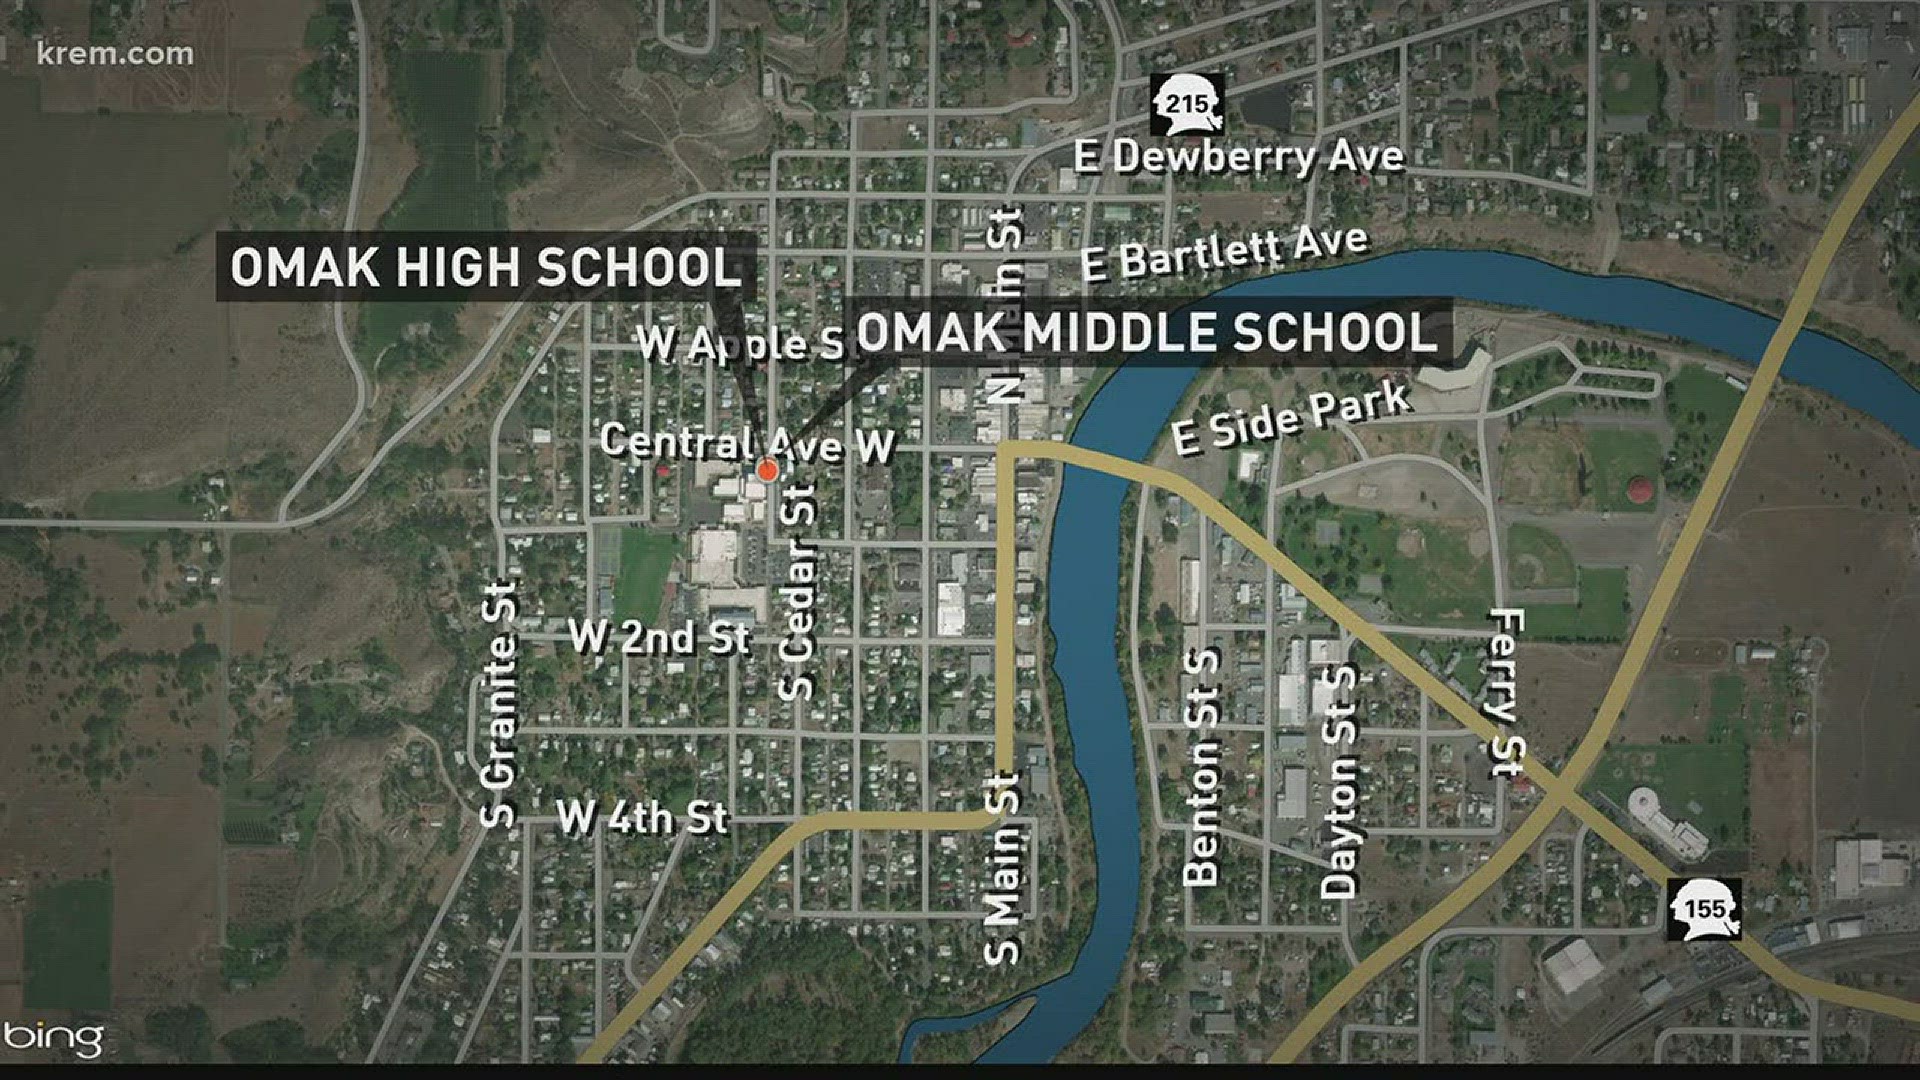 Omak schools placed in lockdown after threatening note discovered (3-21-18)